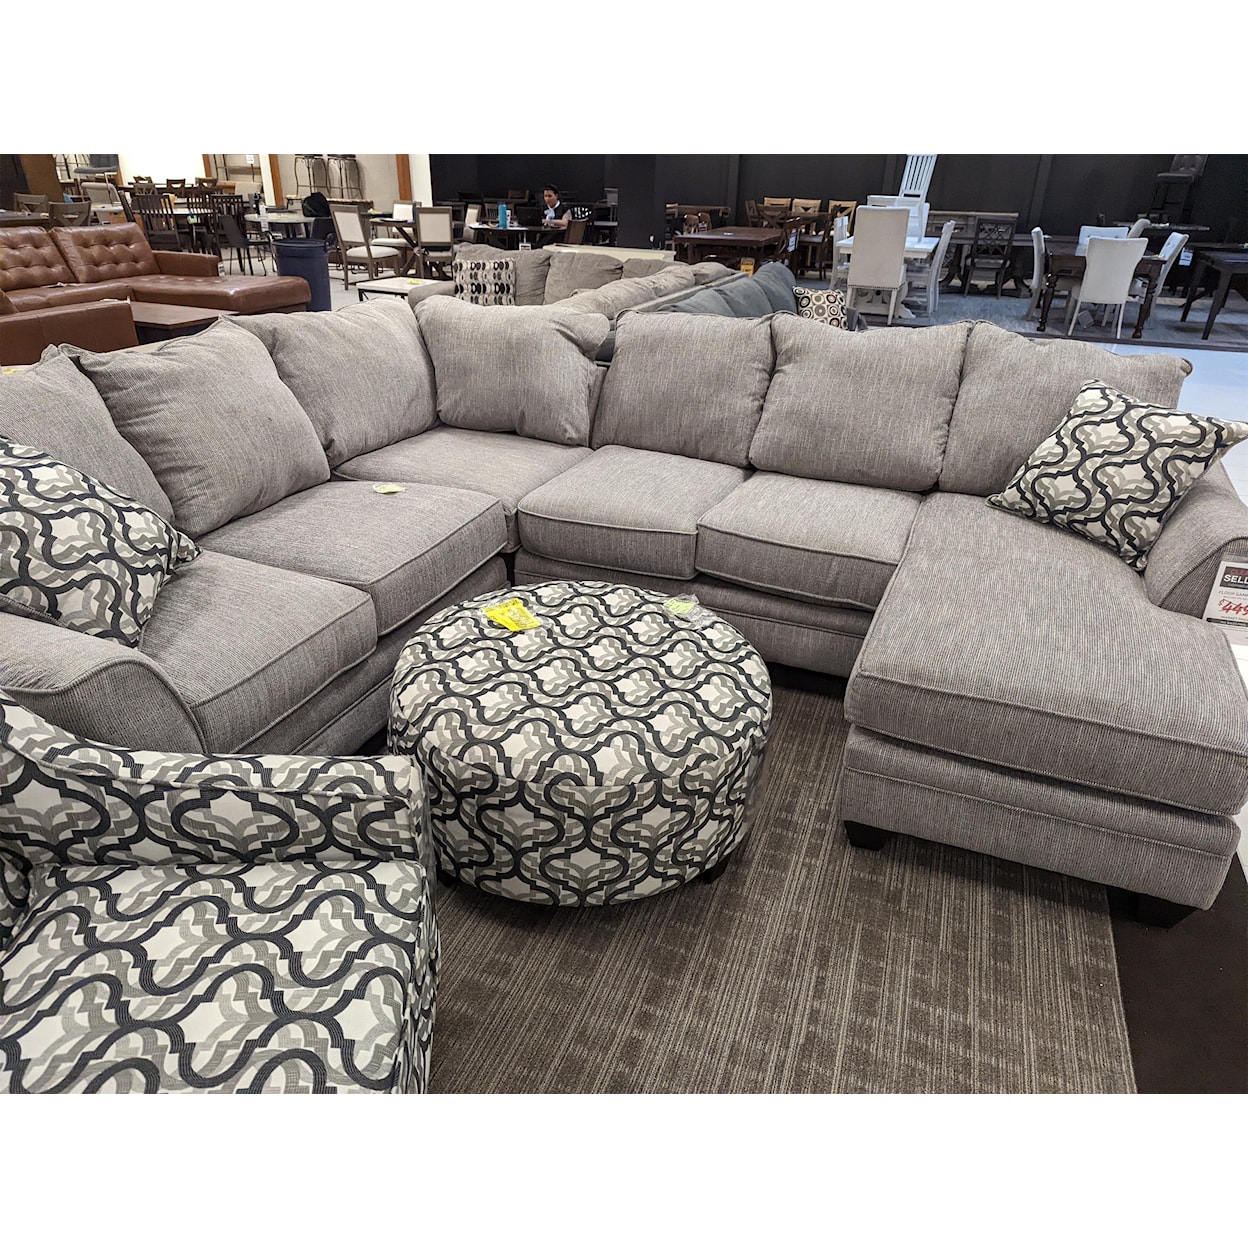 Morris Outlet Clearance and Closeouts Fairfield Commons Mall Last One! Belford Sectional Sofa and Chair!